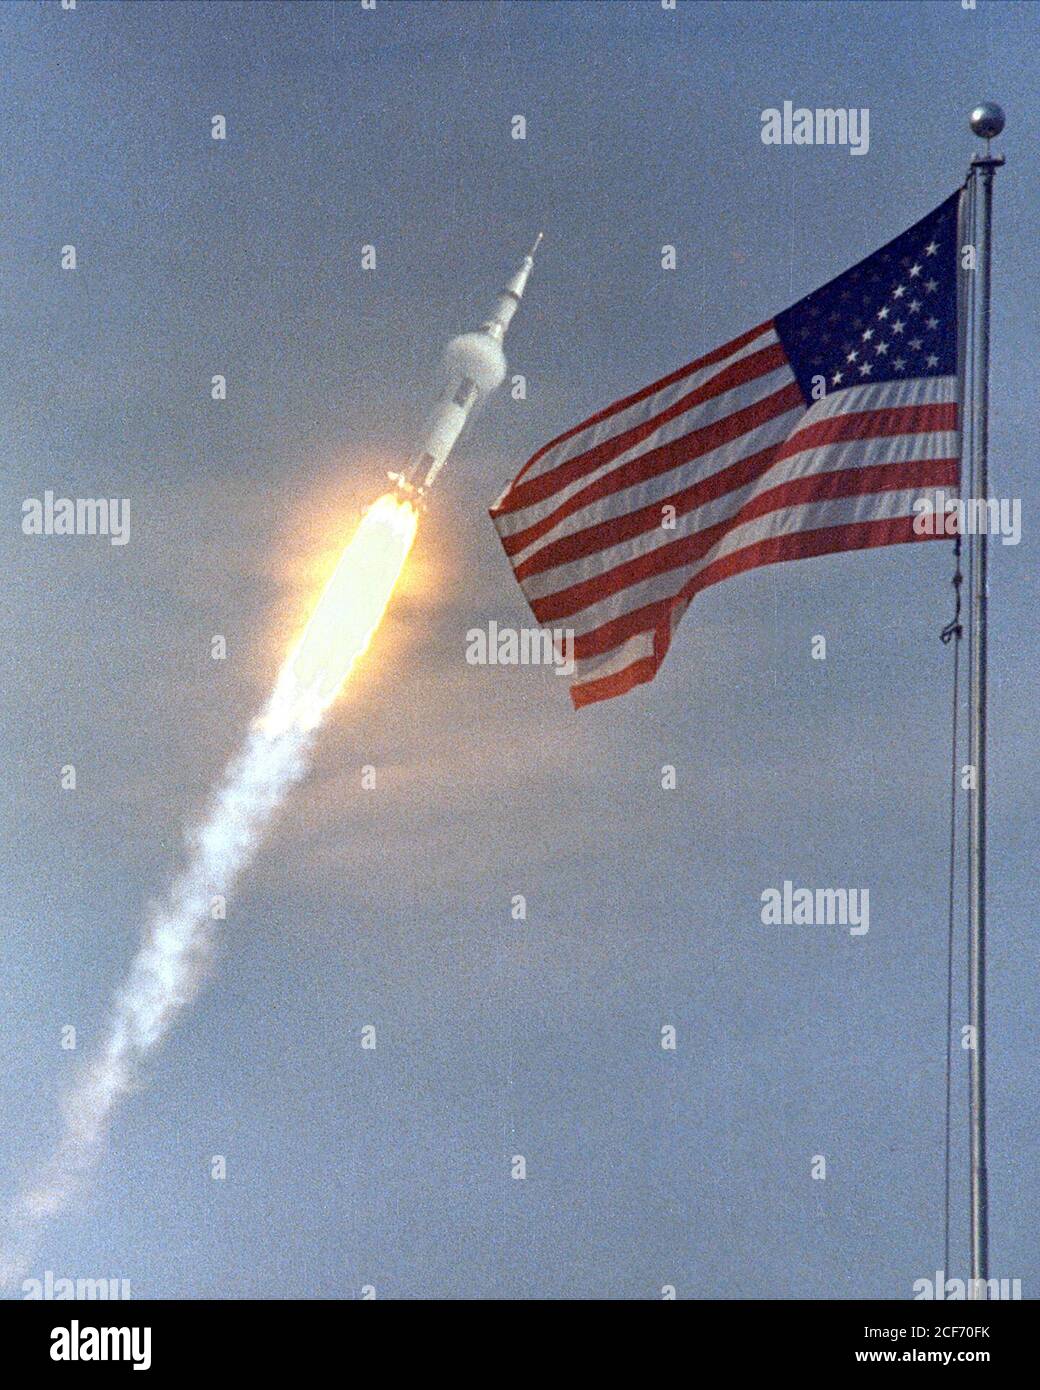 The American flag heralds the flight of Apollo 11, the first Lunar landing mission. The Apollo 11 Saturn V space vehicle lifted off with astronauts Neil A. Armstrong, Michael Collins and Edwin E. Aldrin, Jr., at 9:32 a.m. EDT July 16, 1969, from Kennedy Space Center's Launch Complex 39A. During the planned eight-day mission, Armstrong and Aldrin will descend in a lunar module to the Moon's surface while Collins orbits overhead in the Command Module. The two astronauts are to spend 22 hours on the Moon, including two and one-half hours outside the lunar module. They will gather samples of lunar Stock Photo